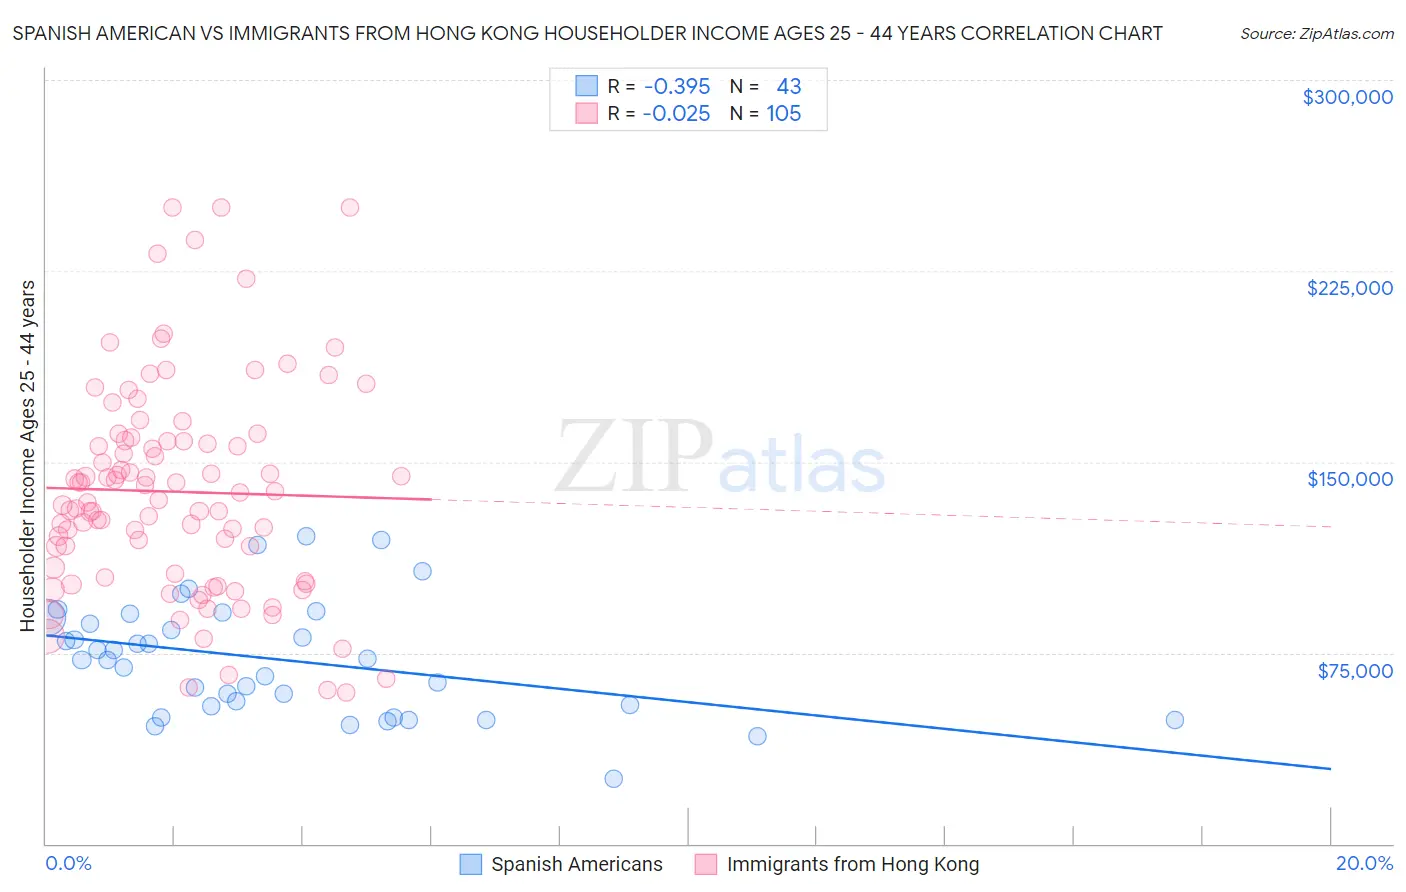 Spanish American vs Immigrants from Hong Kong Householder Income Ages 25 - 44 years